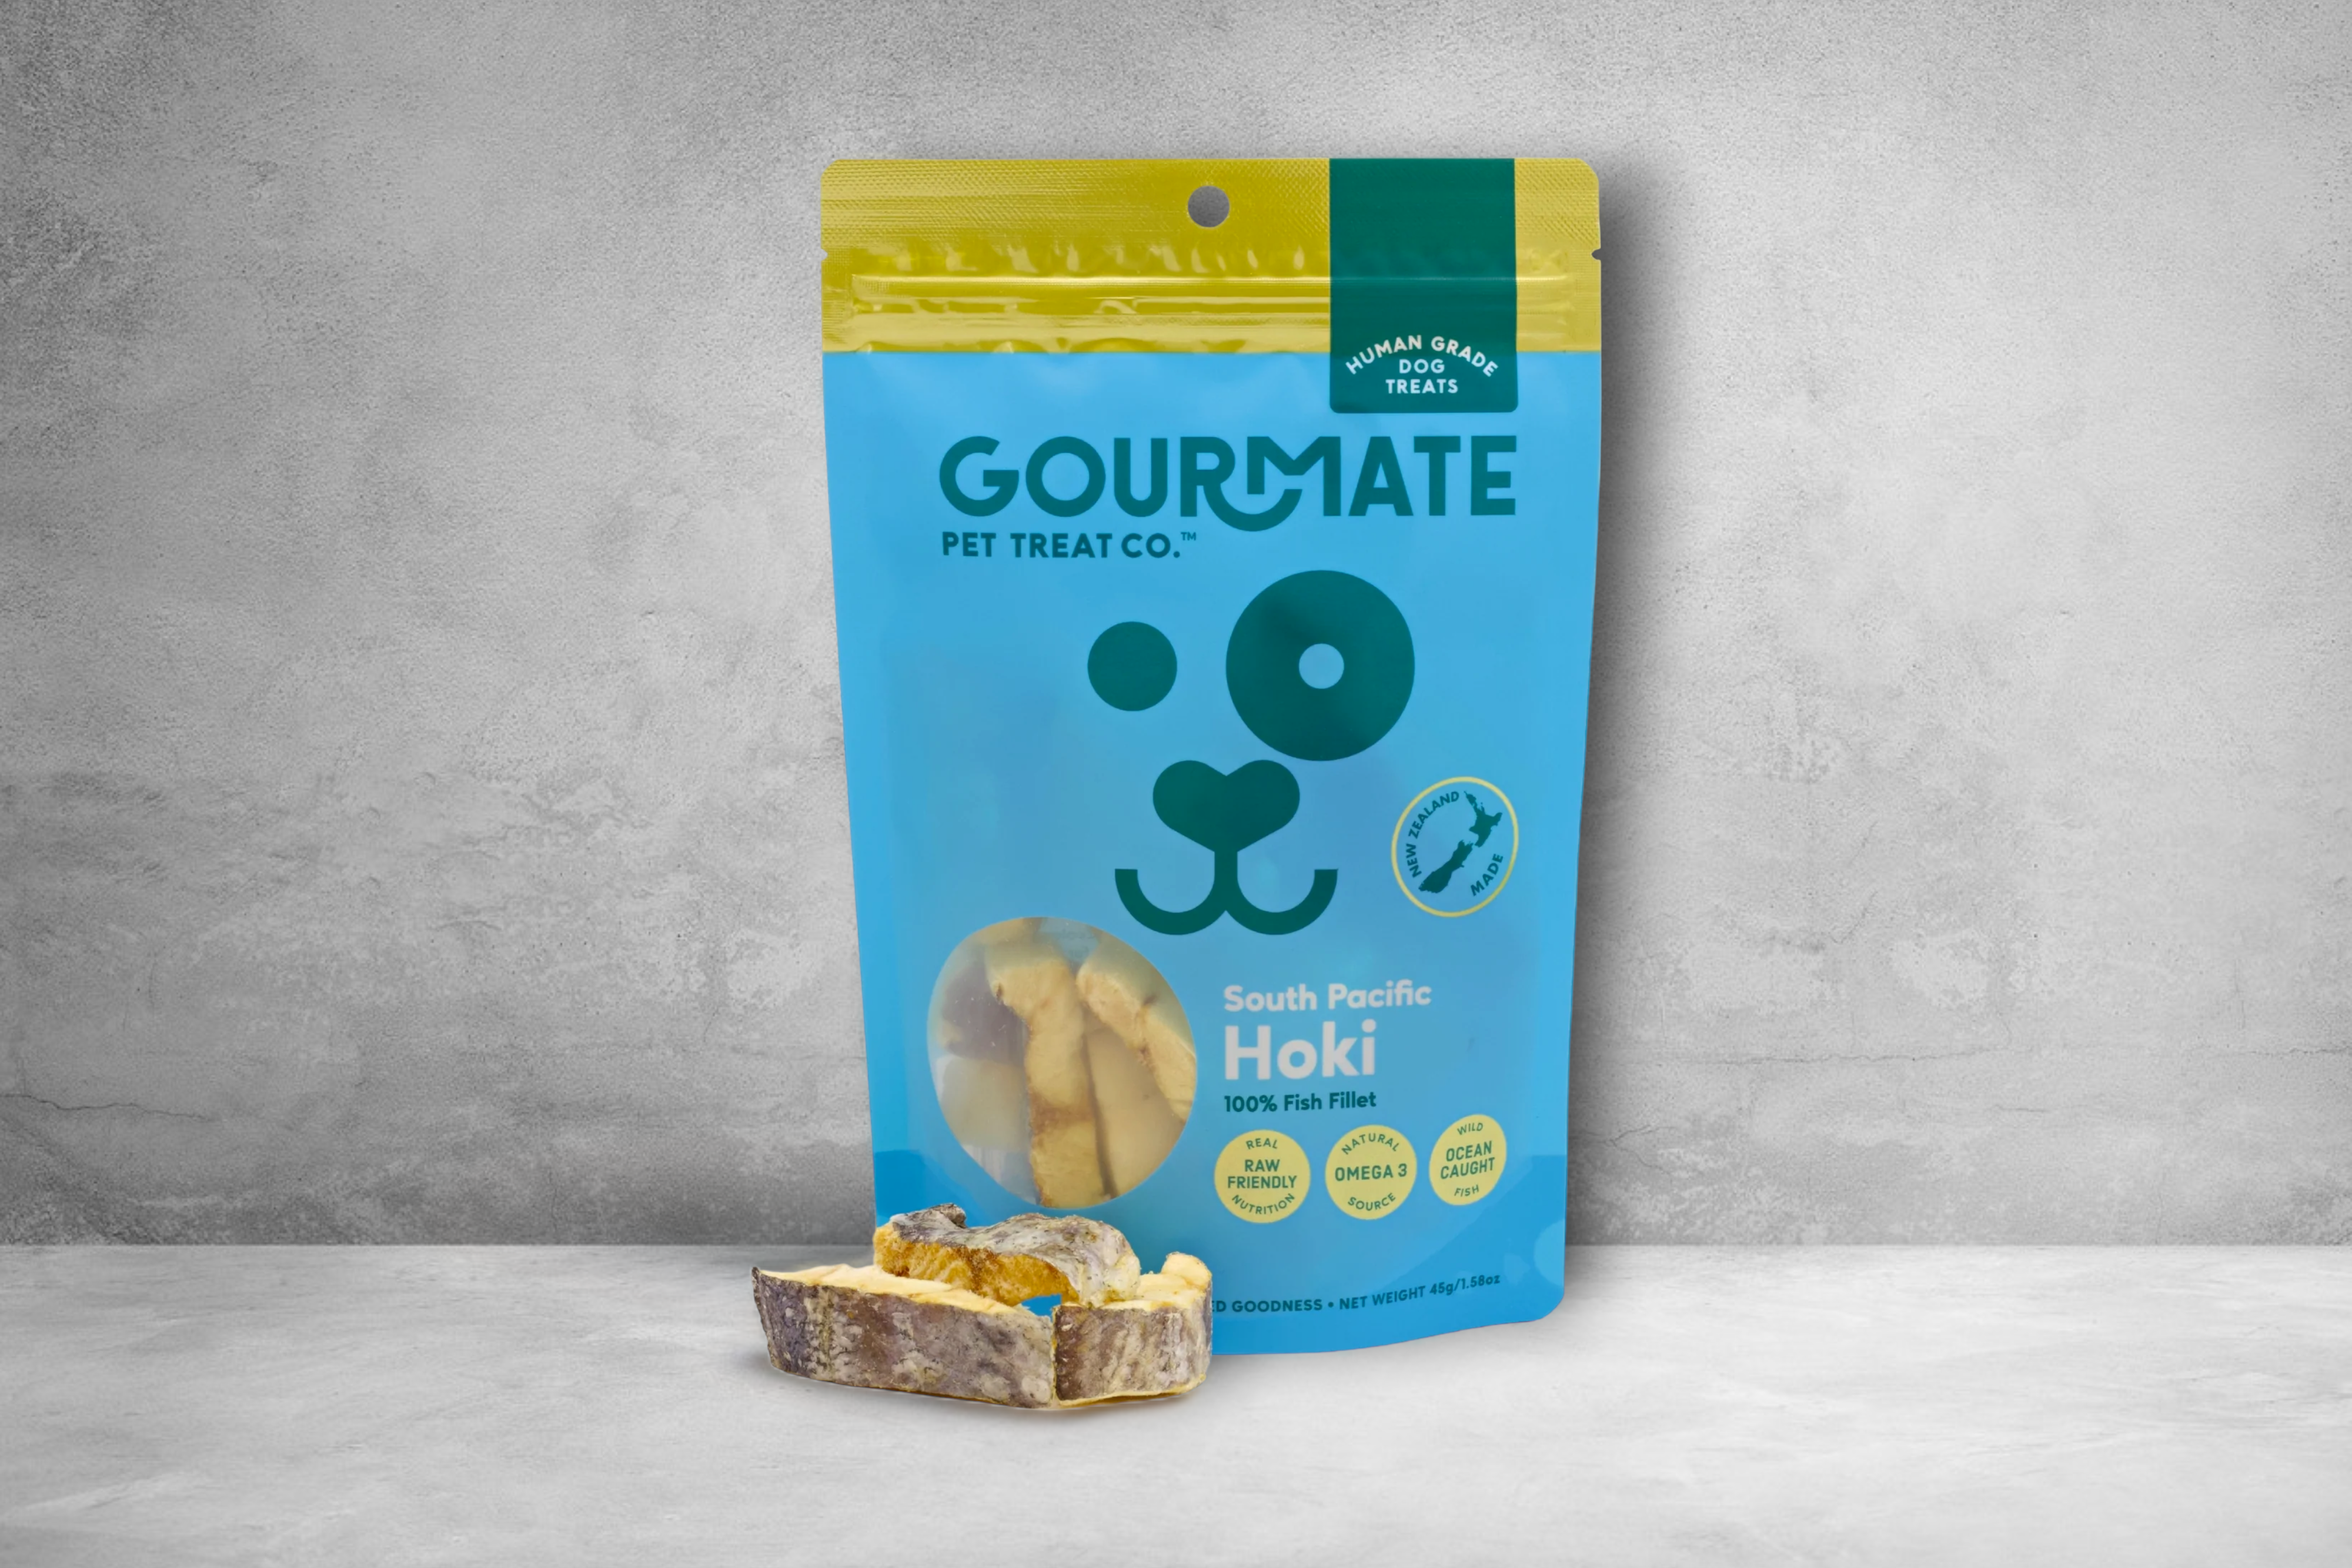 A vibrant package of Gourmate Pet Treat Co. South Pacific Hoki Treats, enriched with omega-3, with a sample of the product displayed in front.